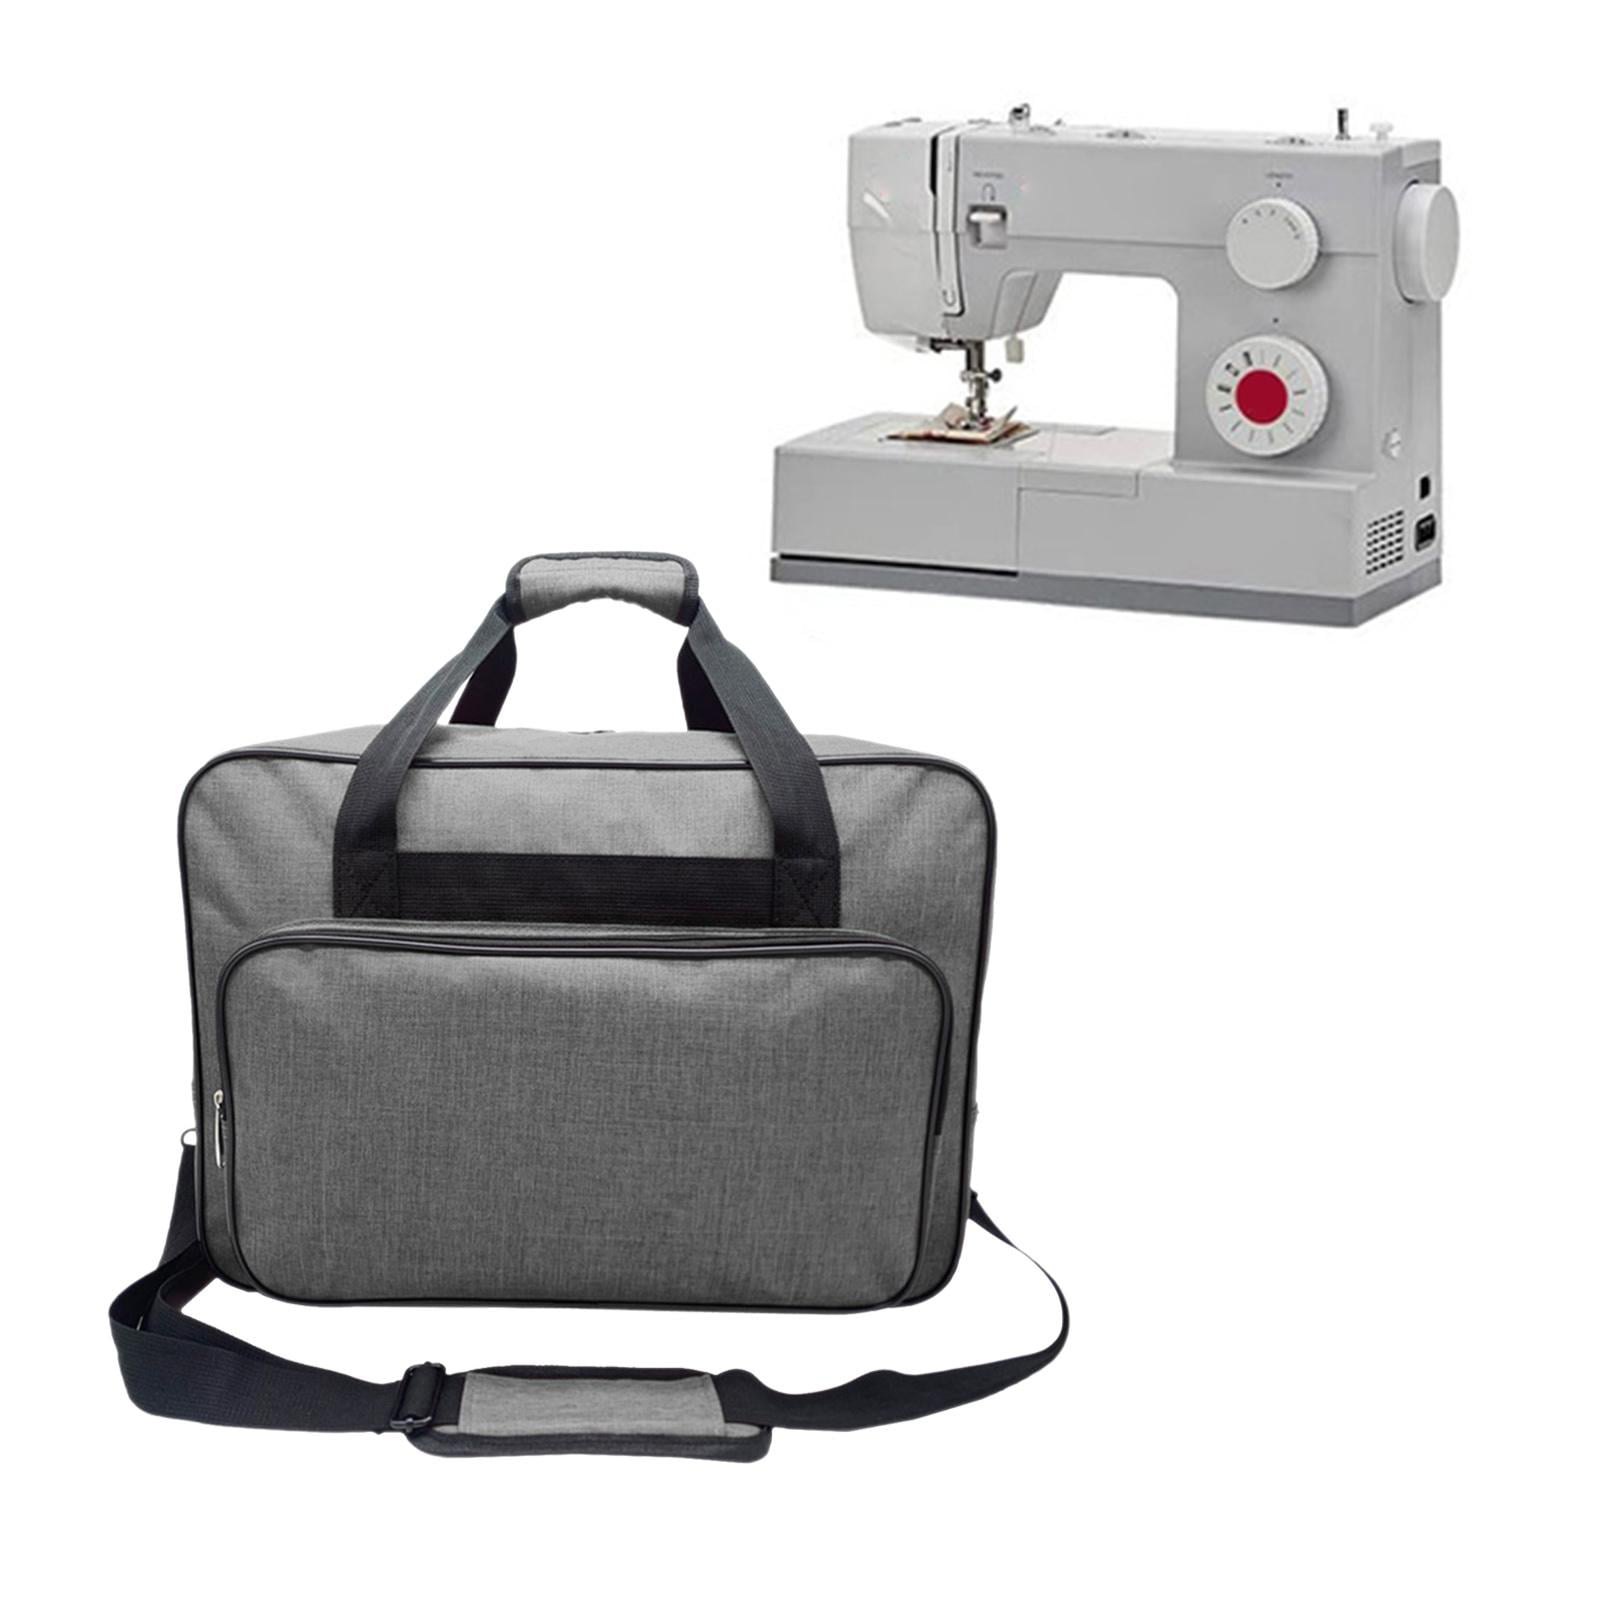 Crutello Sewing Machine Case - Universal Sewing Machine Carrying Bag with  Storage Pockets Compatible with Serger Sewing Machines Measuring 13.75 x 12  x 13.5 Gray